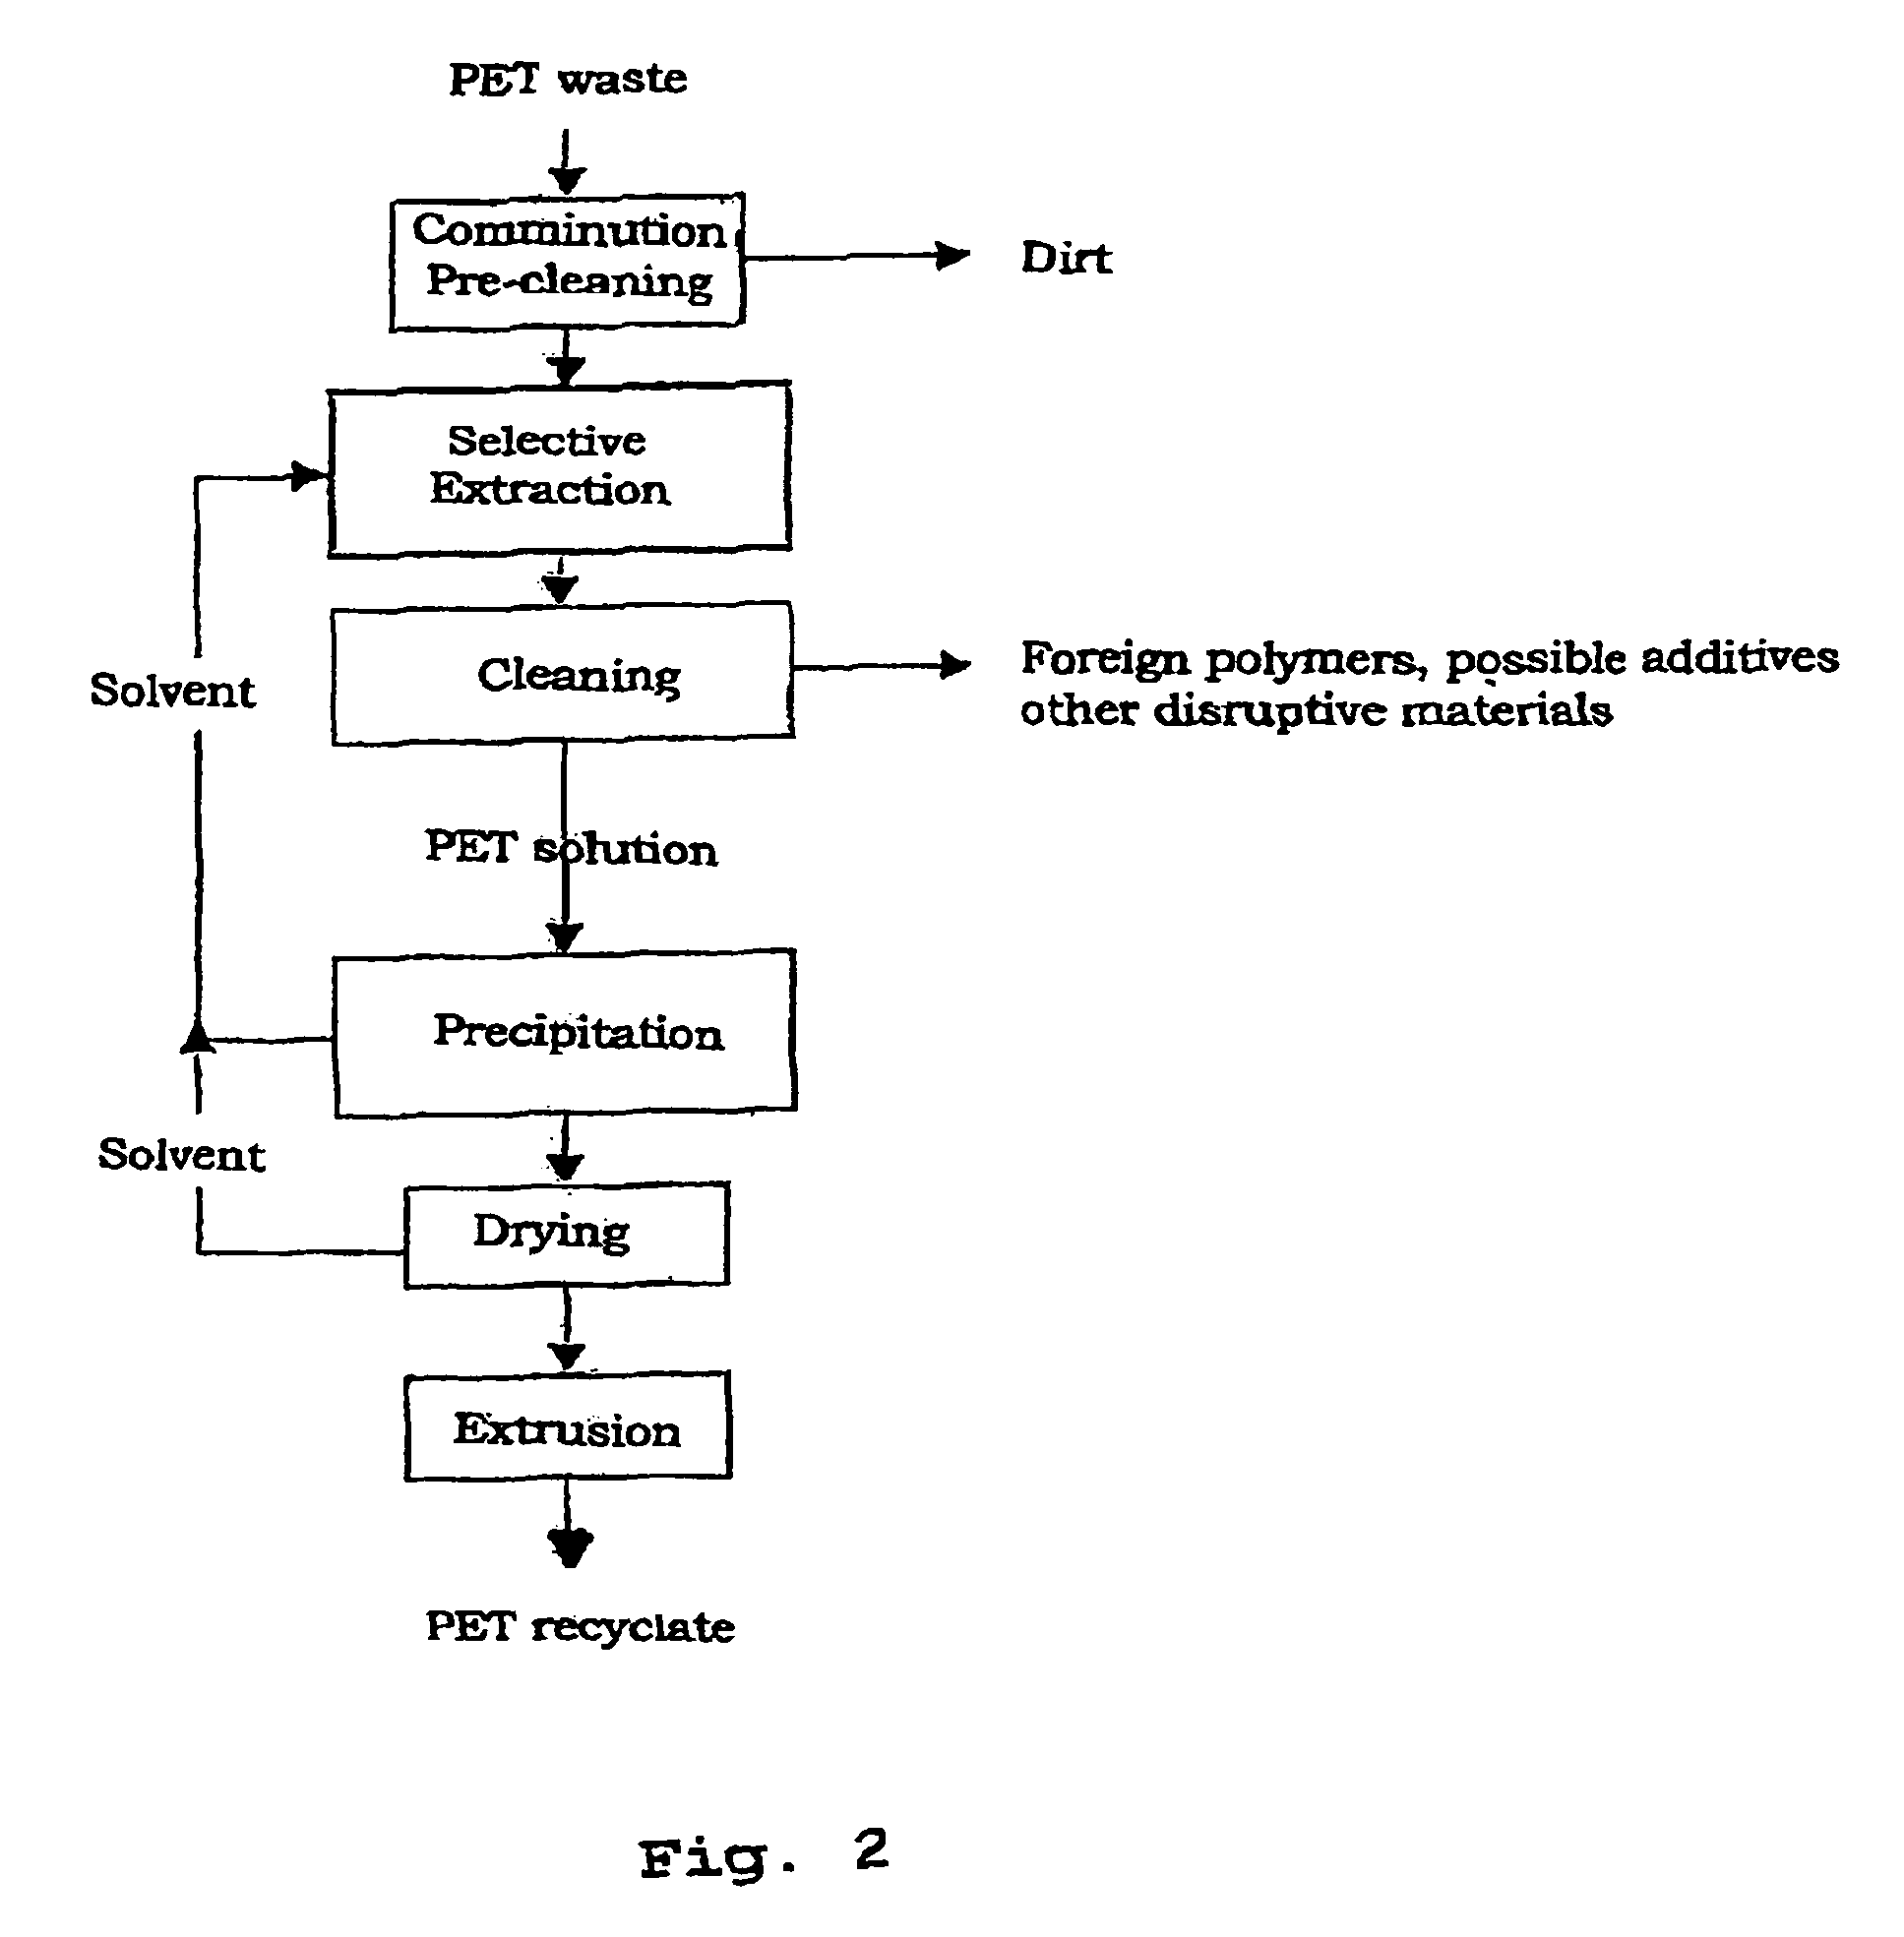 Method for recycling polyesters or polyester mixtures from polyester-containing waste